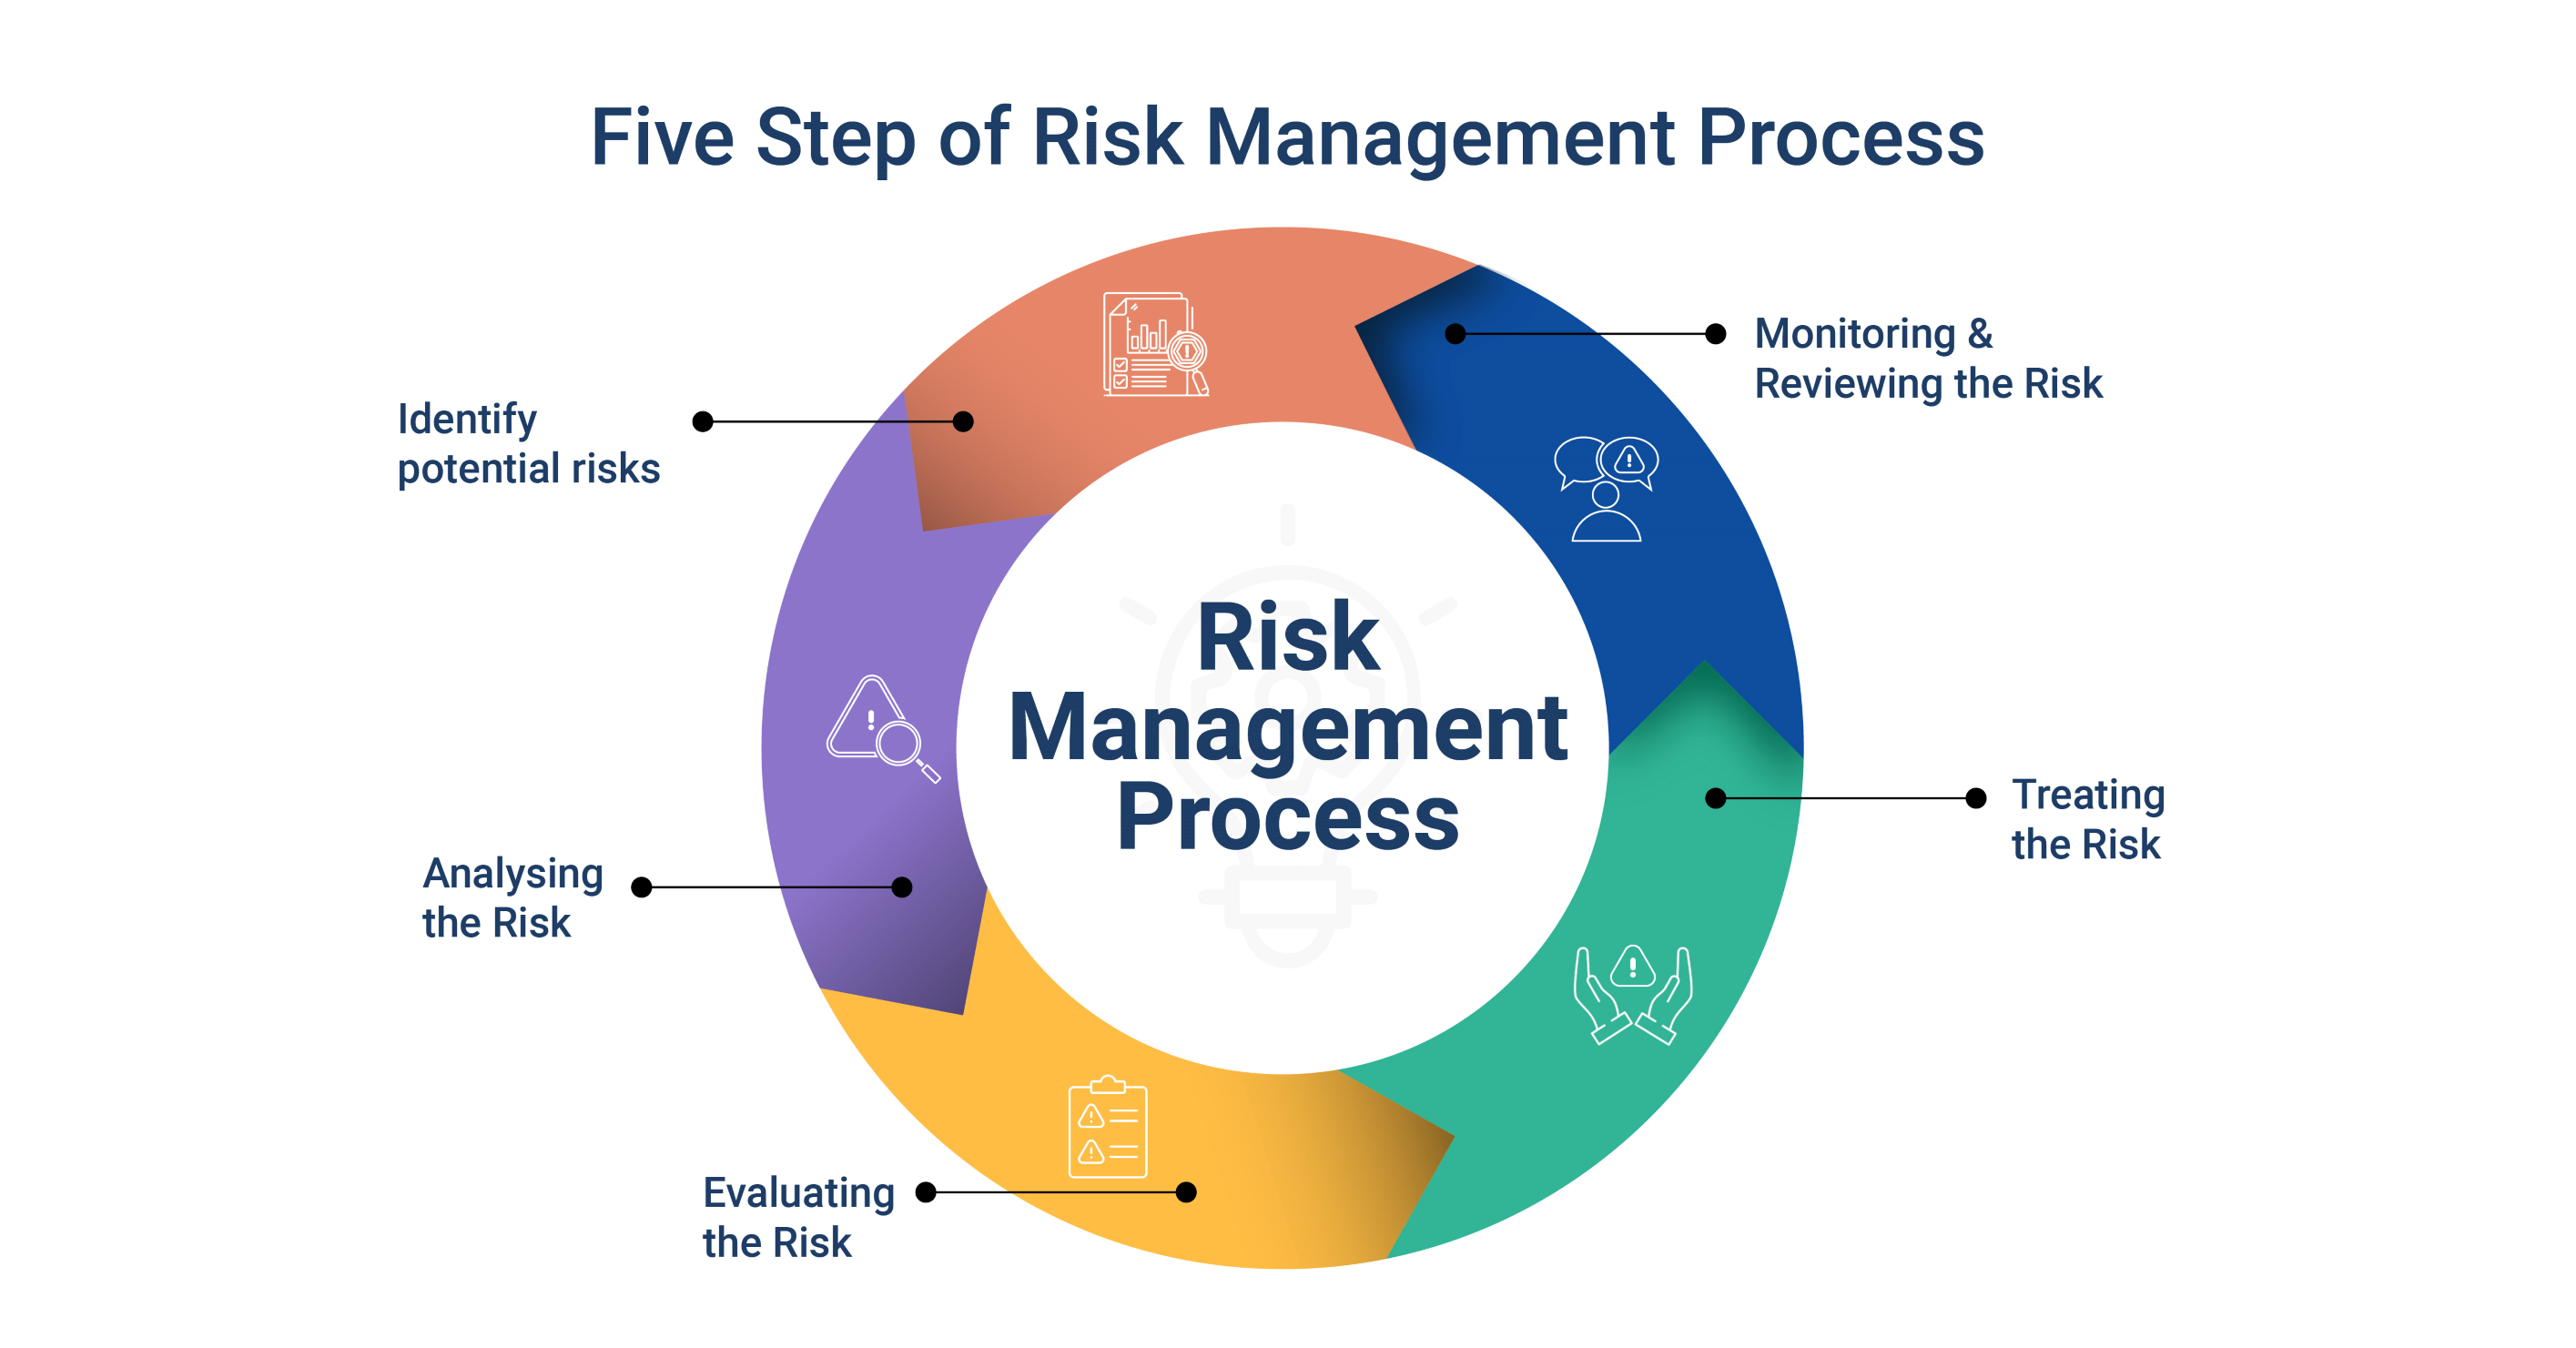 enterprise risk management a case study in the pharmaceutical industry